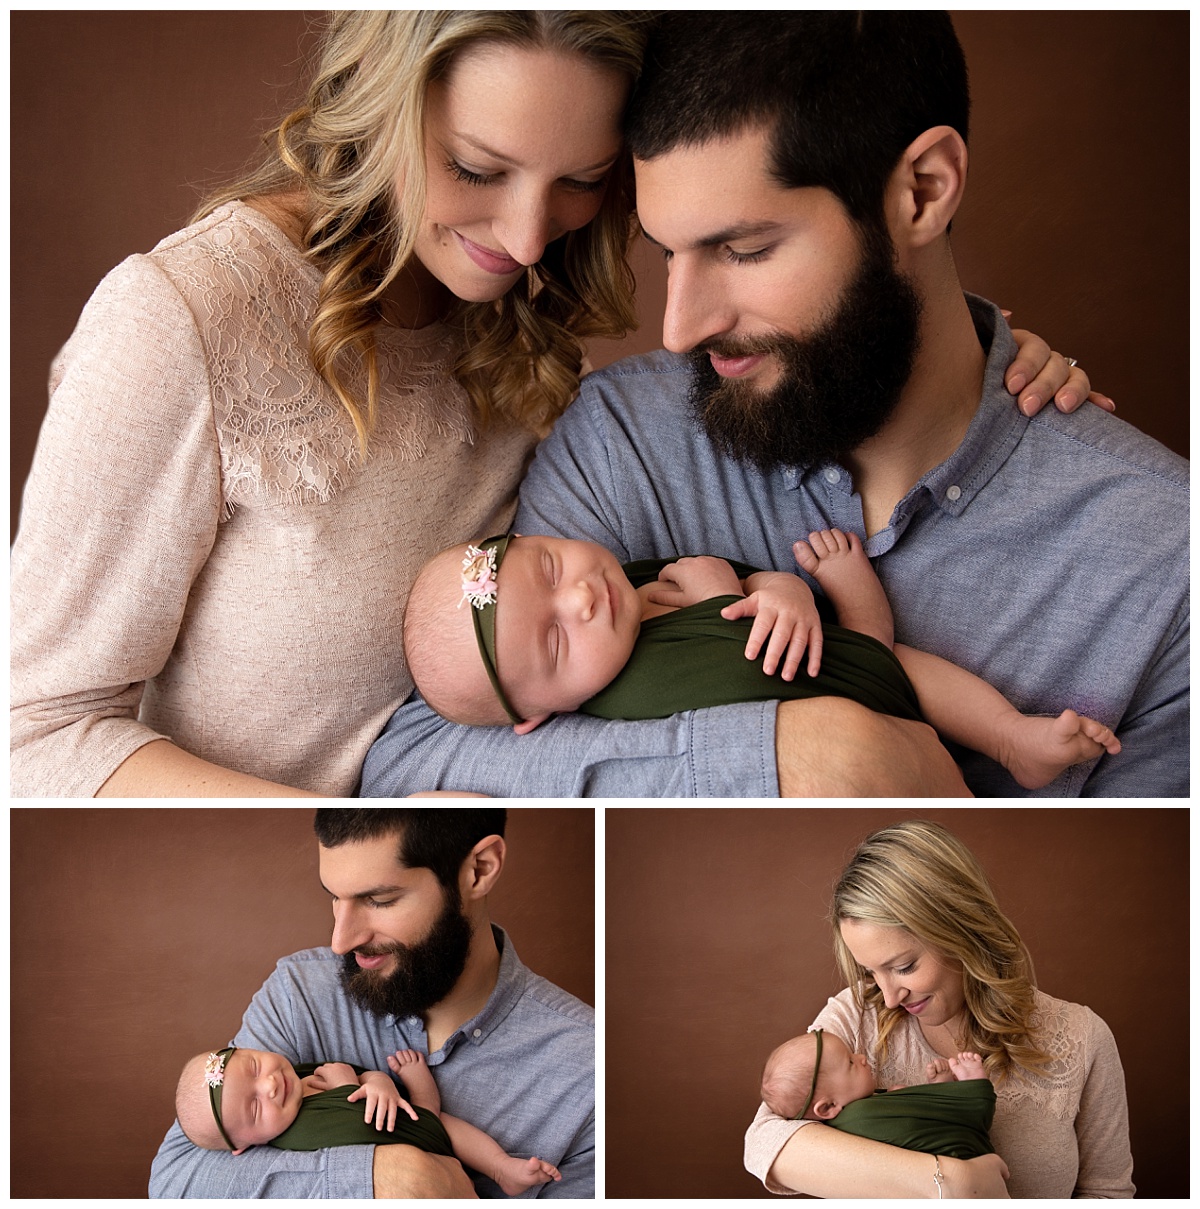 st-louis-newborn-photographer-baby-girl-smiling-with mom-and-dad-on-brown-background.jpg